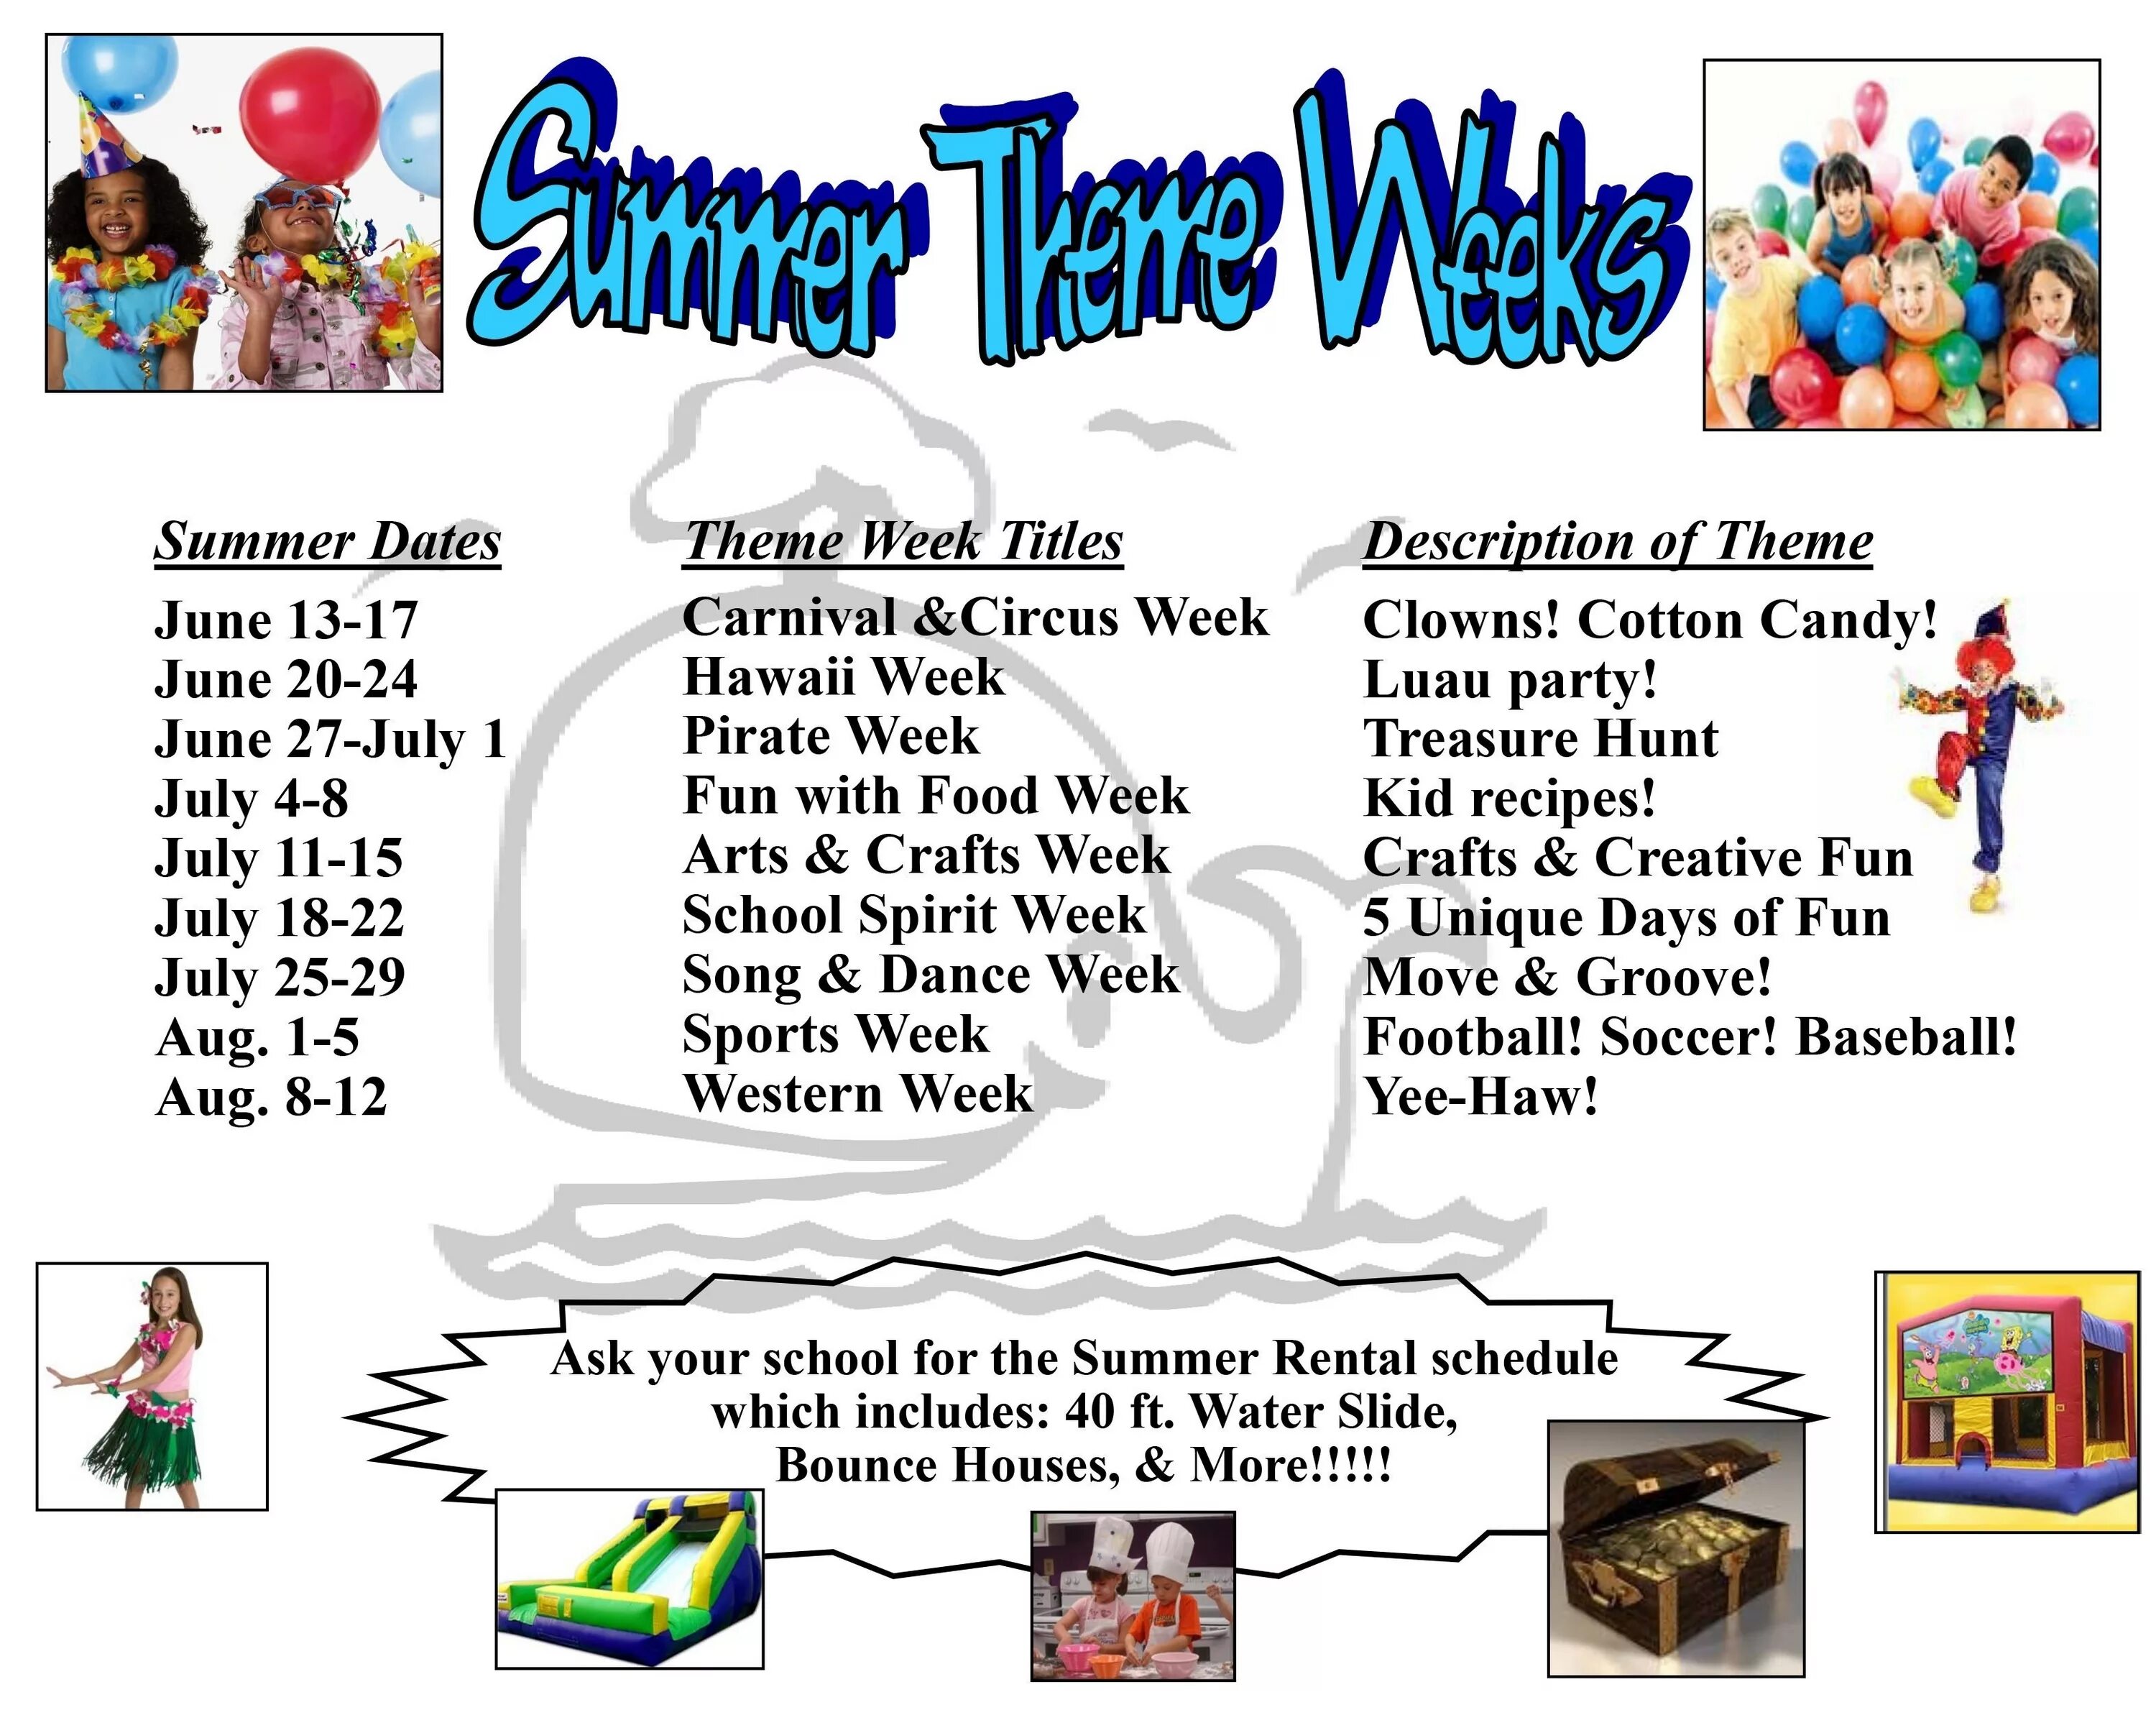 Questions about camps. Summer Camp Themes. Упражнения по теме Summer Camp. Фф Summer Camp. Summer Camp Worksheets.